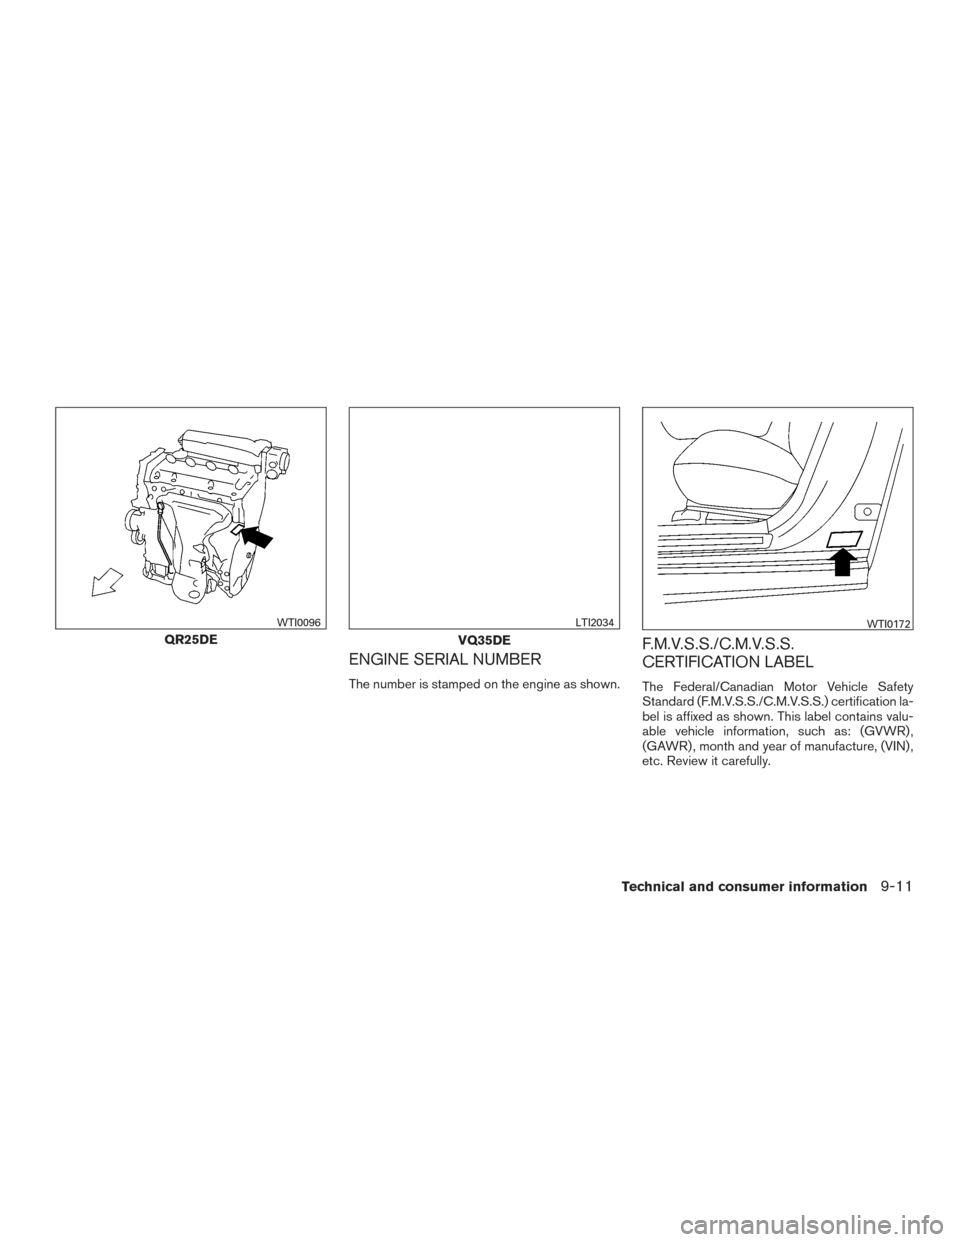 NISSAN ALTIMA 2015 L33 / 5.G Owners Manual ENGINE SERIAL NUMBER
The number is stamped on the engine as shown.
F.M.V.S.S./C.M.V.S.S.
CERTIFICATION LABEL
The Federal/Canadian Motor Vehicle Safety
Standard (F.M.V.S.S./C.M.V.S.S.) certification la